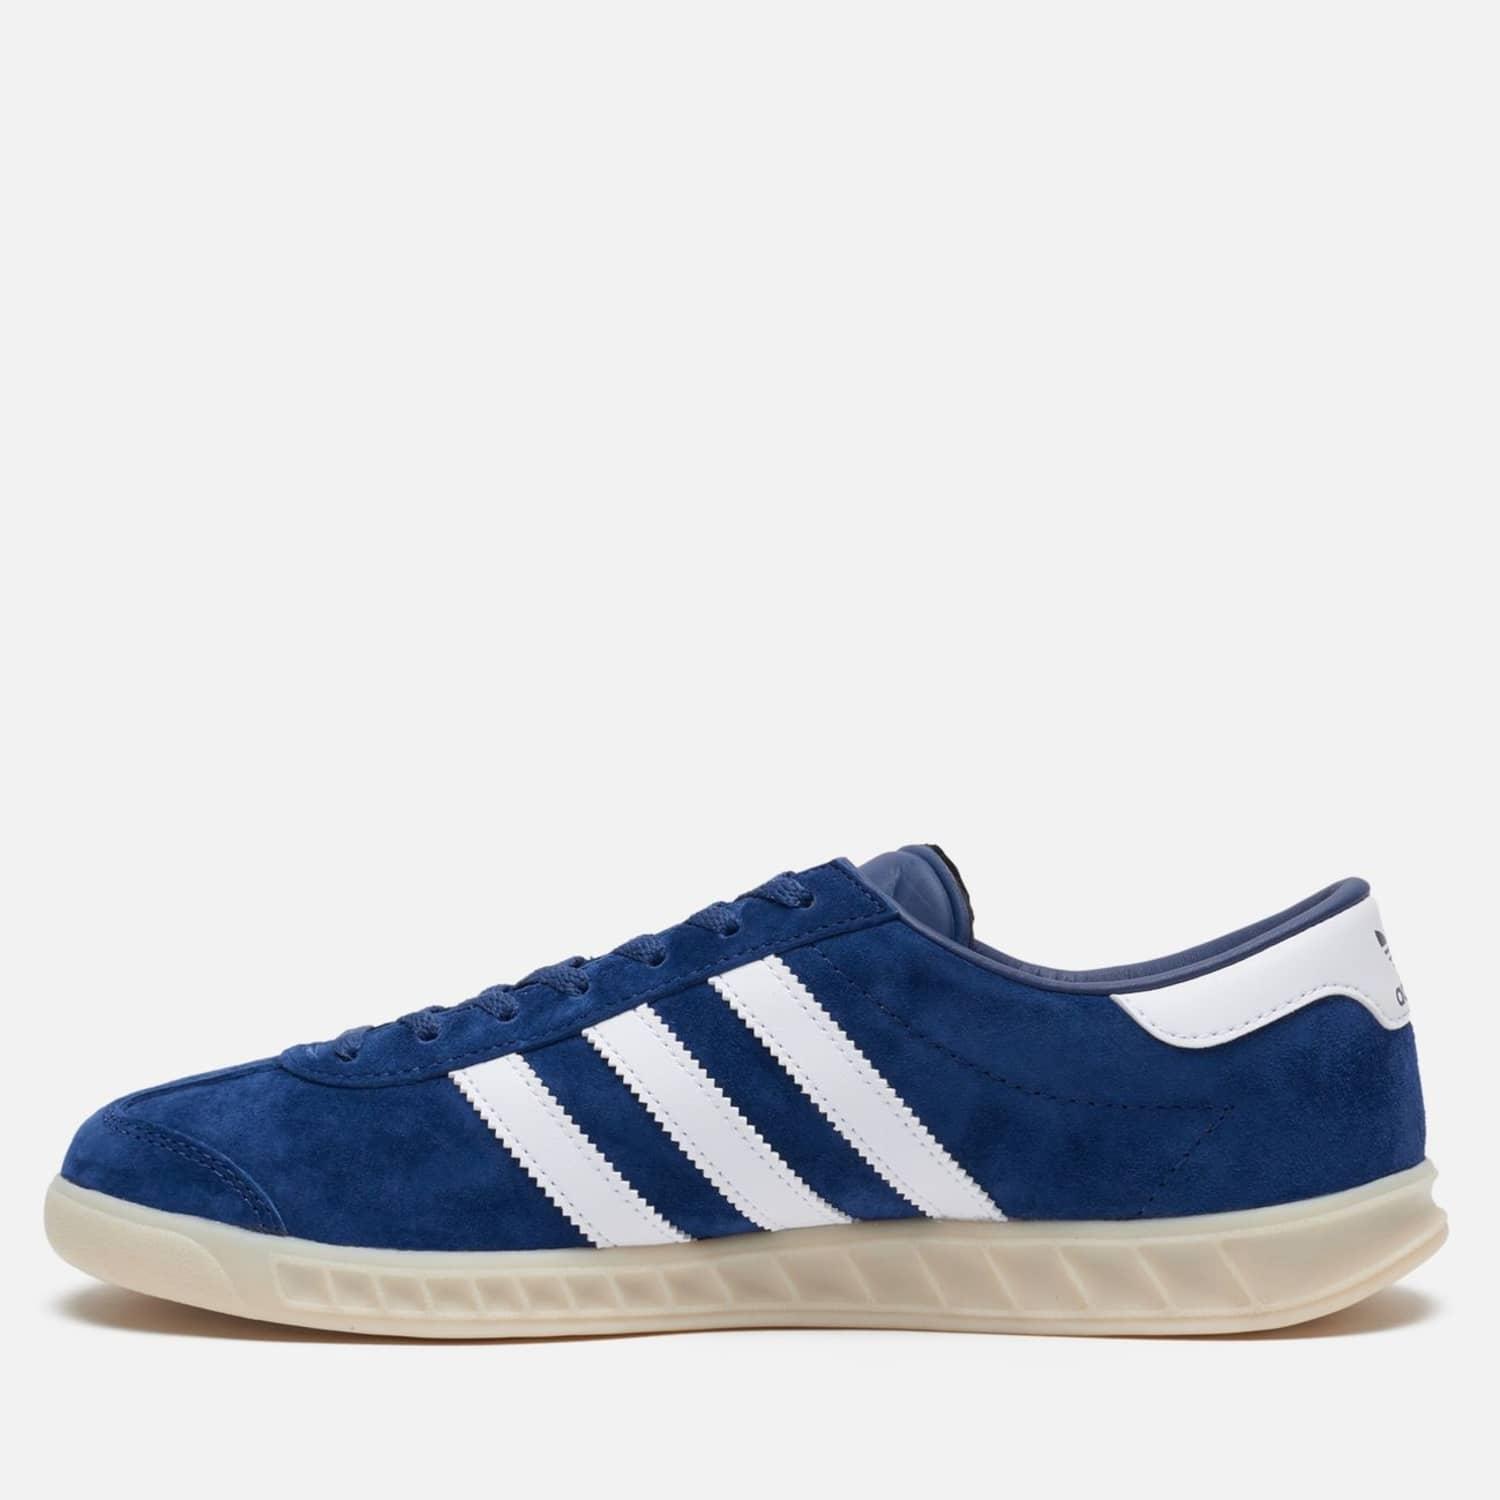 adidas Suede Hamburg Lace-up Sneakers in Blue for Men - Save 81% - Lyst